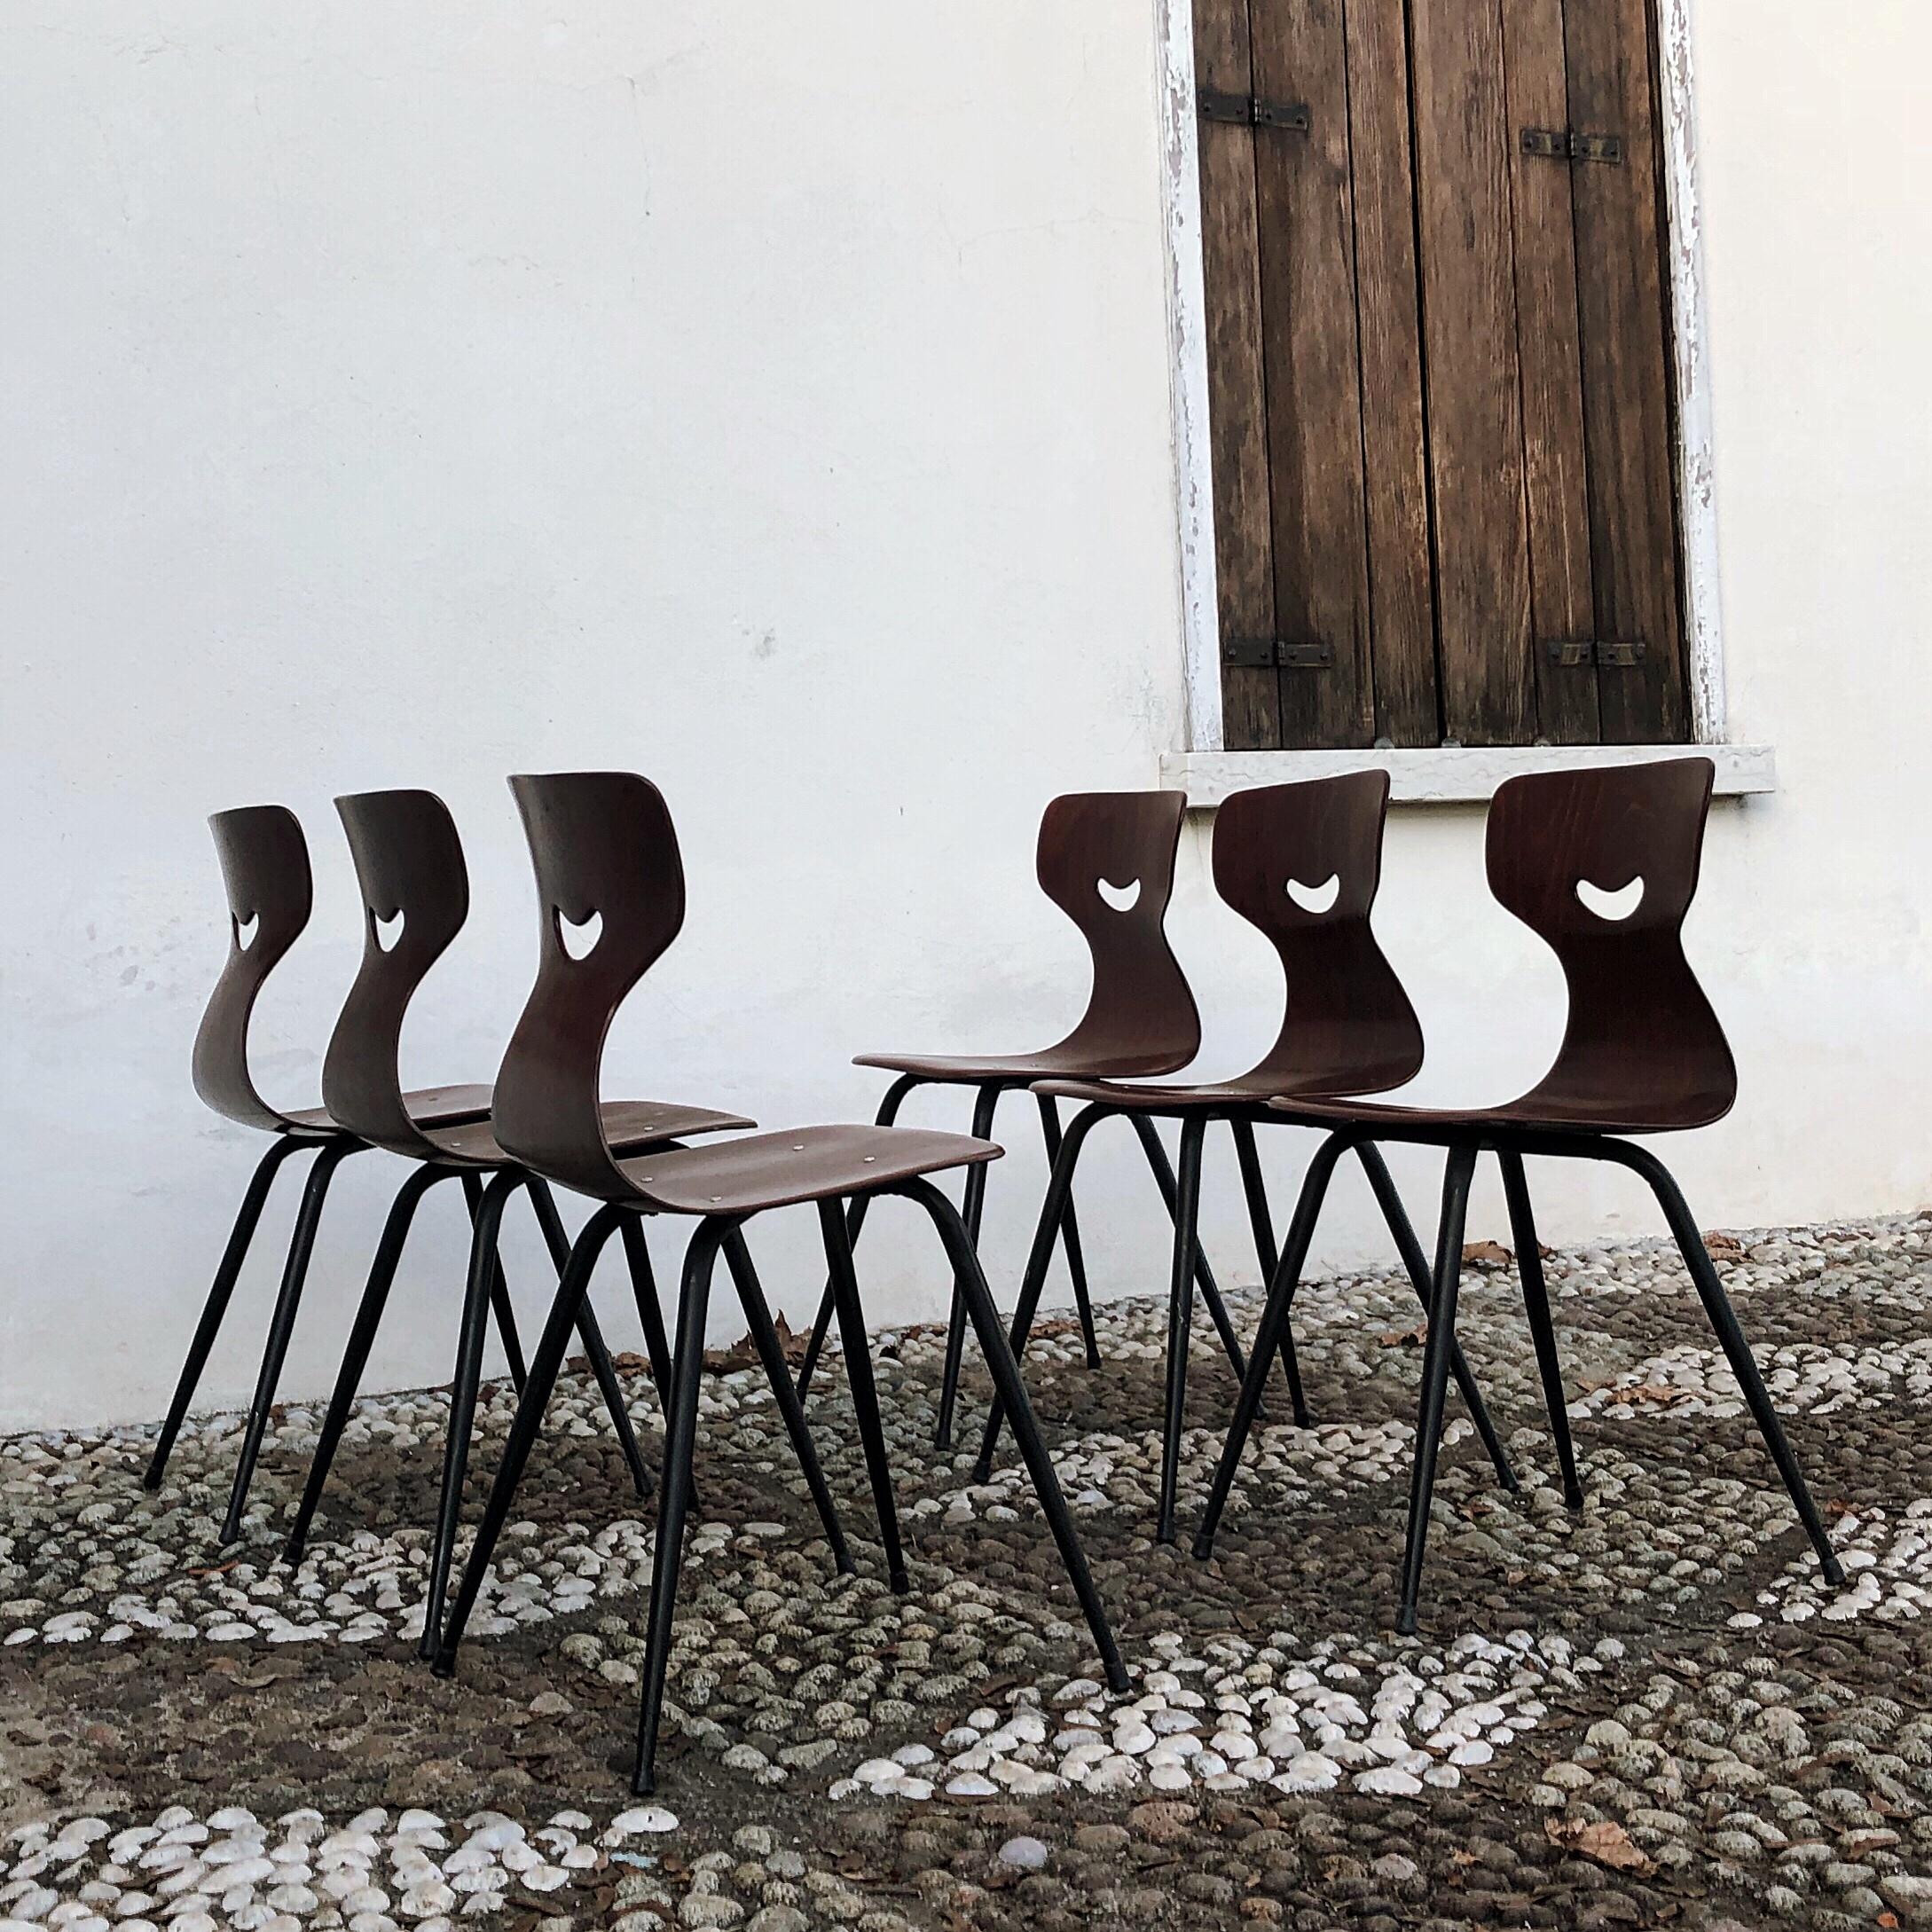 Adam Stegner Plywood Midcentury Sculpted Chairs for Pagholz Flottöto, 1950s For Sale 4